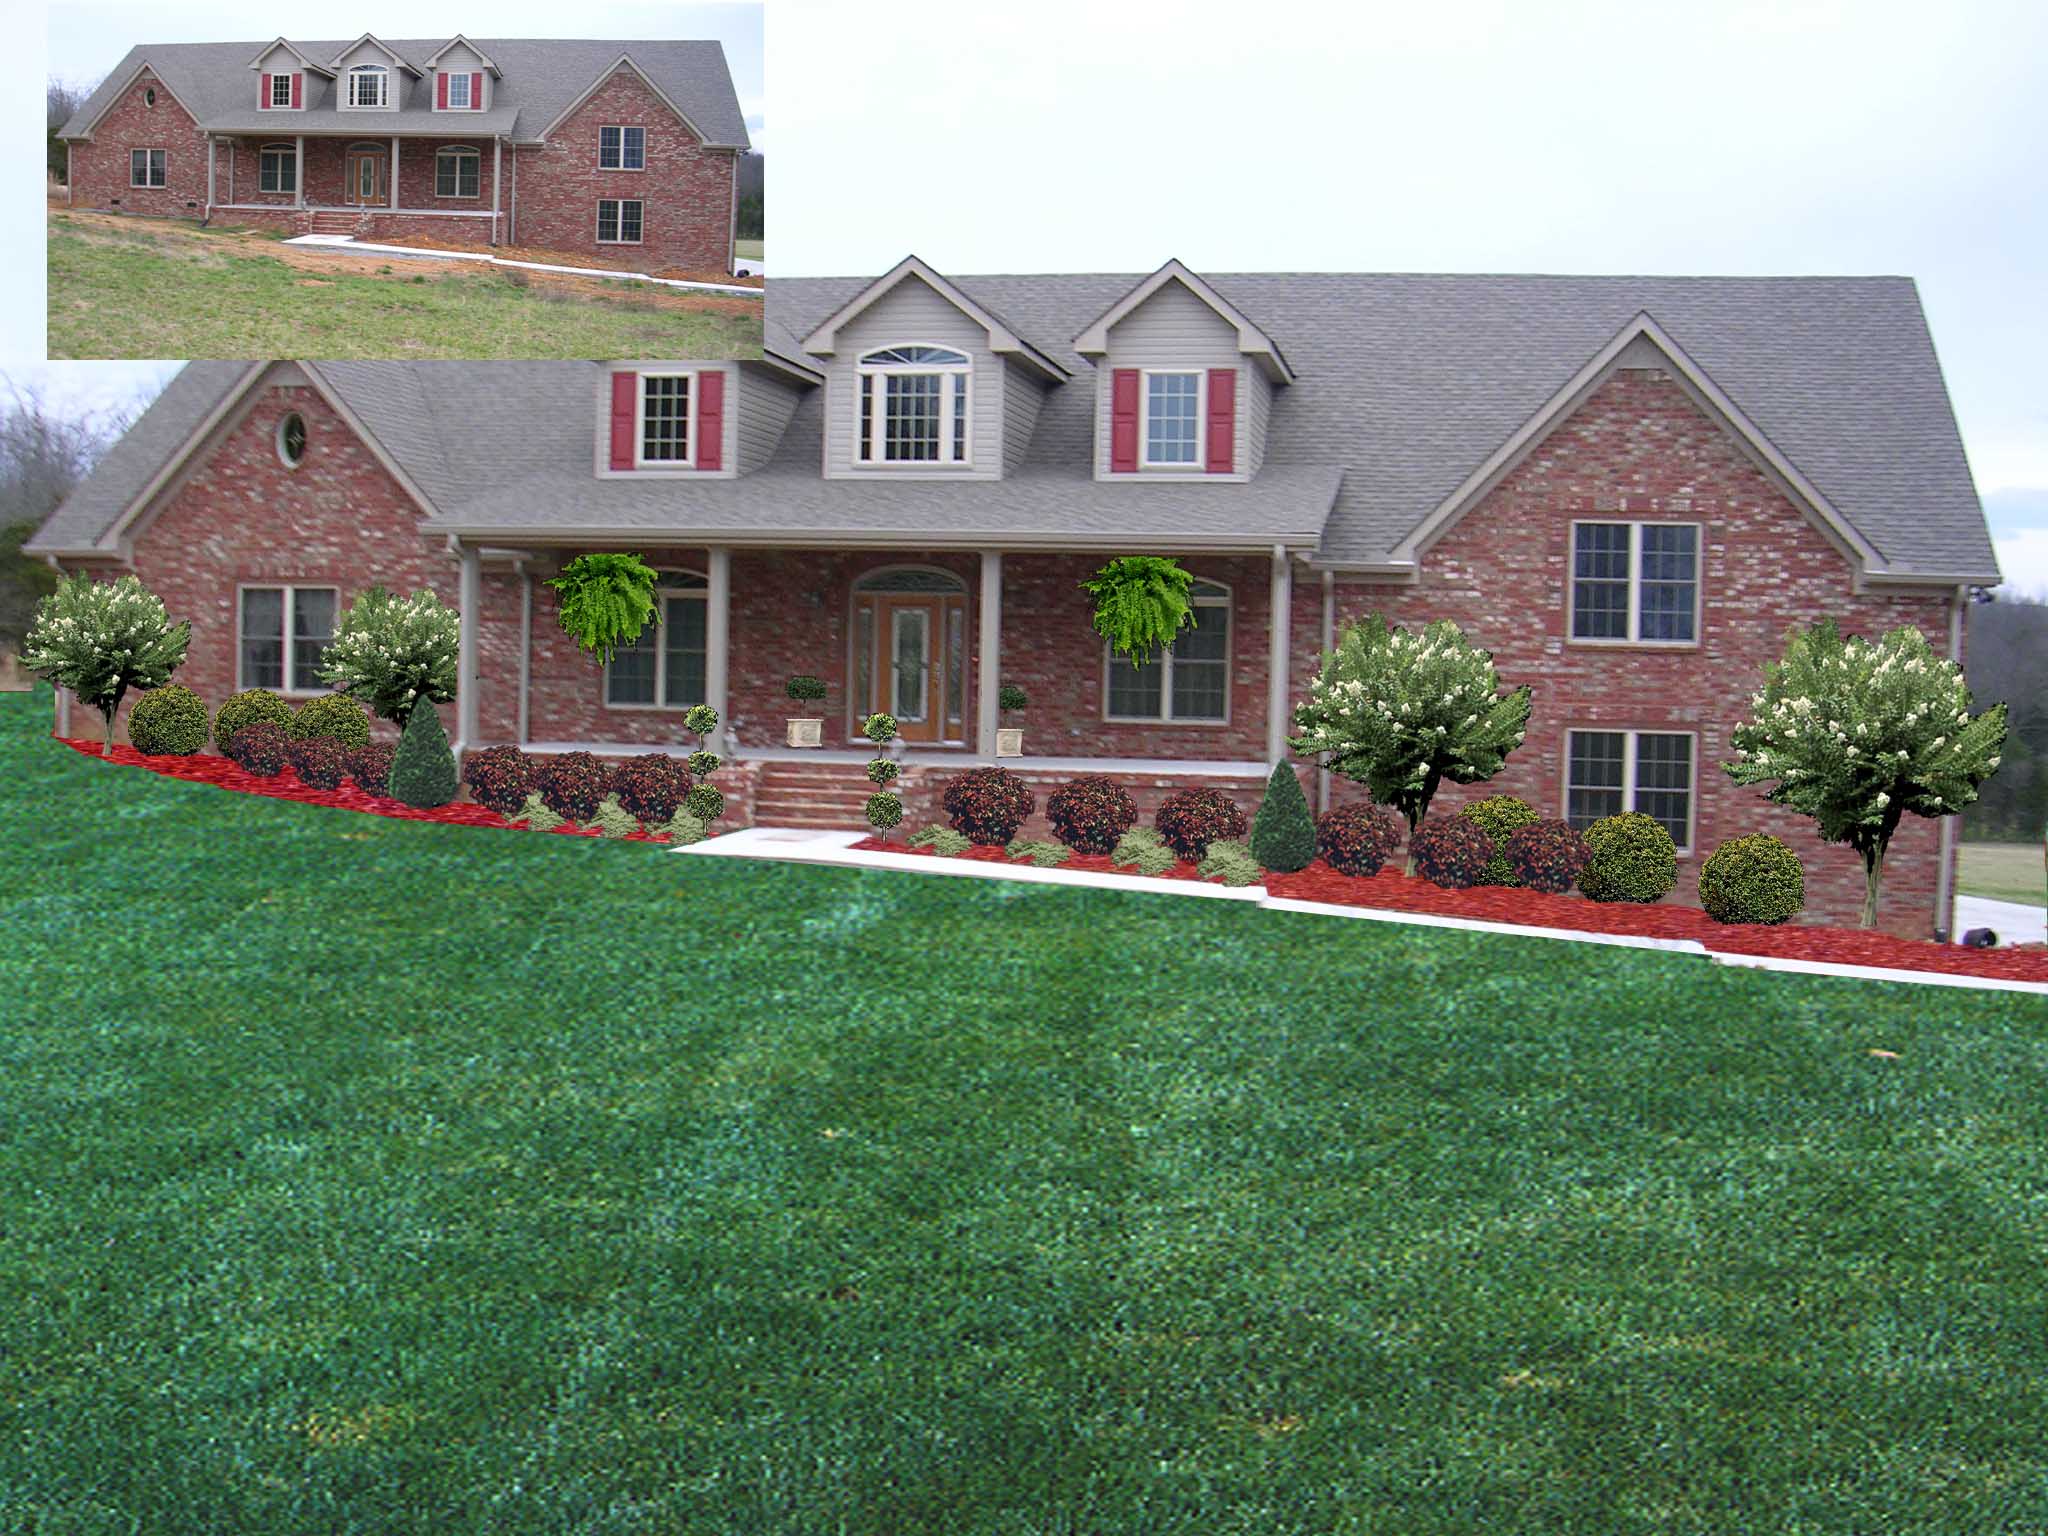 Greenwaypros Landscaping Murfreesboro, Landscaping Services Franklin Tn